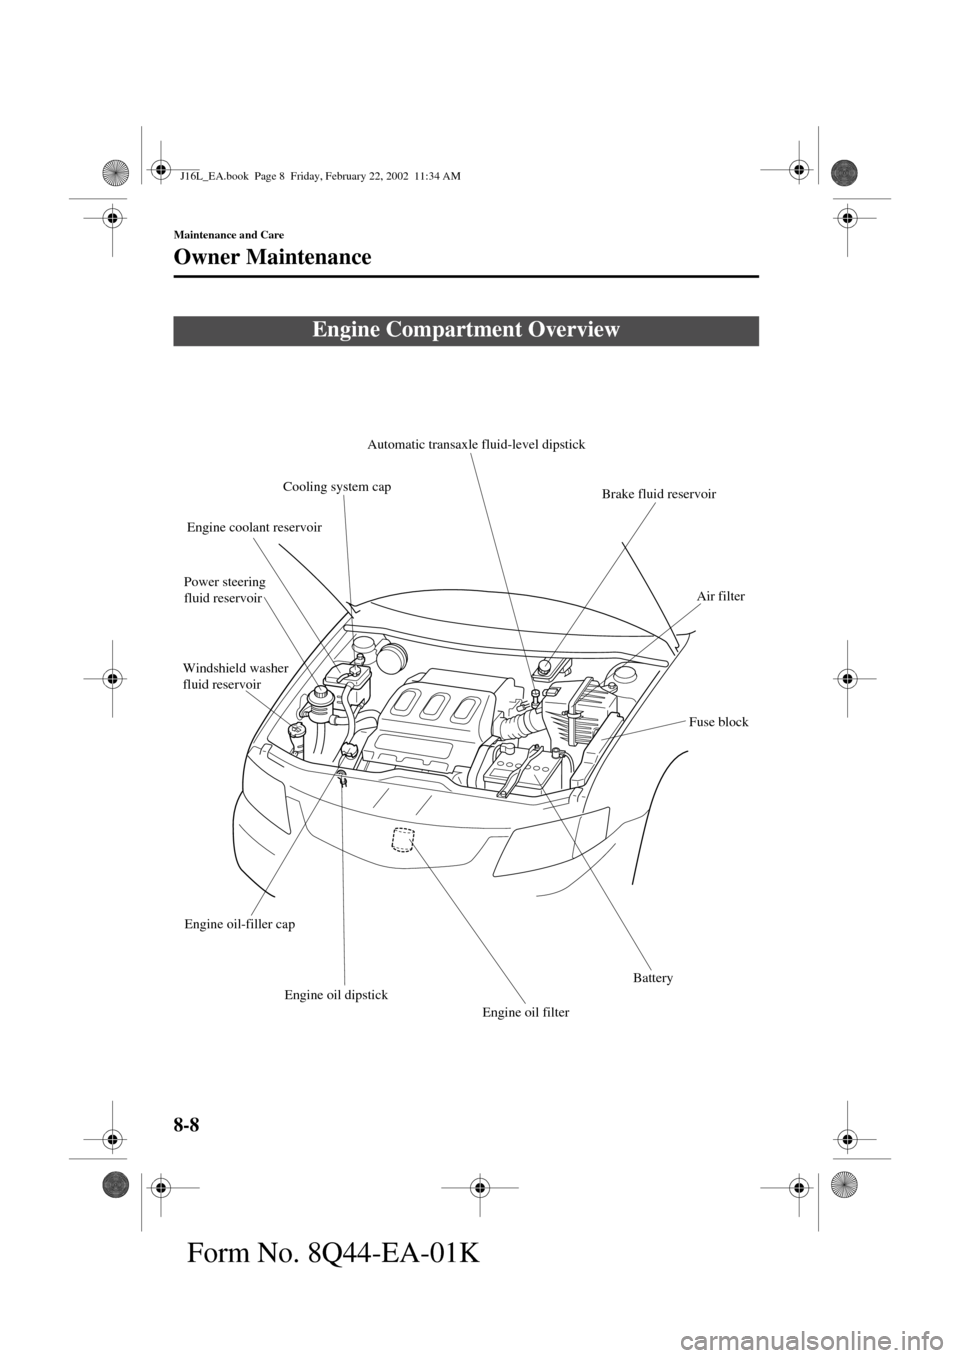 MAZDA MODEL MPV 2002  Owners Manual (in English) 8-8
Maintenance and Care
Owner Maintenance
Form No. 8Q44-EA-01K
Engine Compartment Overview
Automatic transaxle fluid-level dipstick 
Cooling system cap
Engine coolant reservoir
Power steering 
fluid 